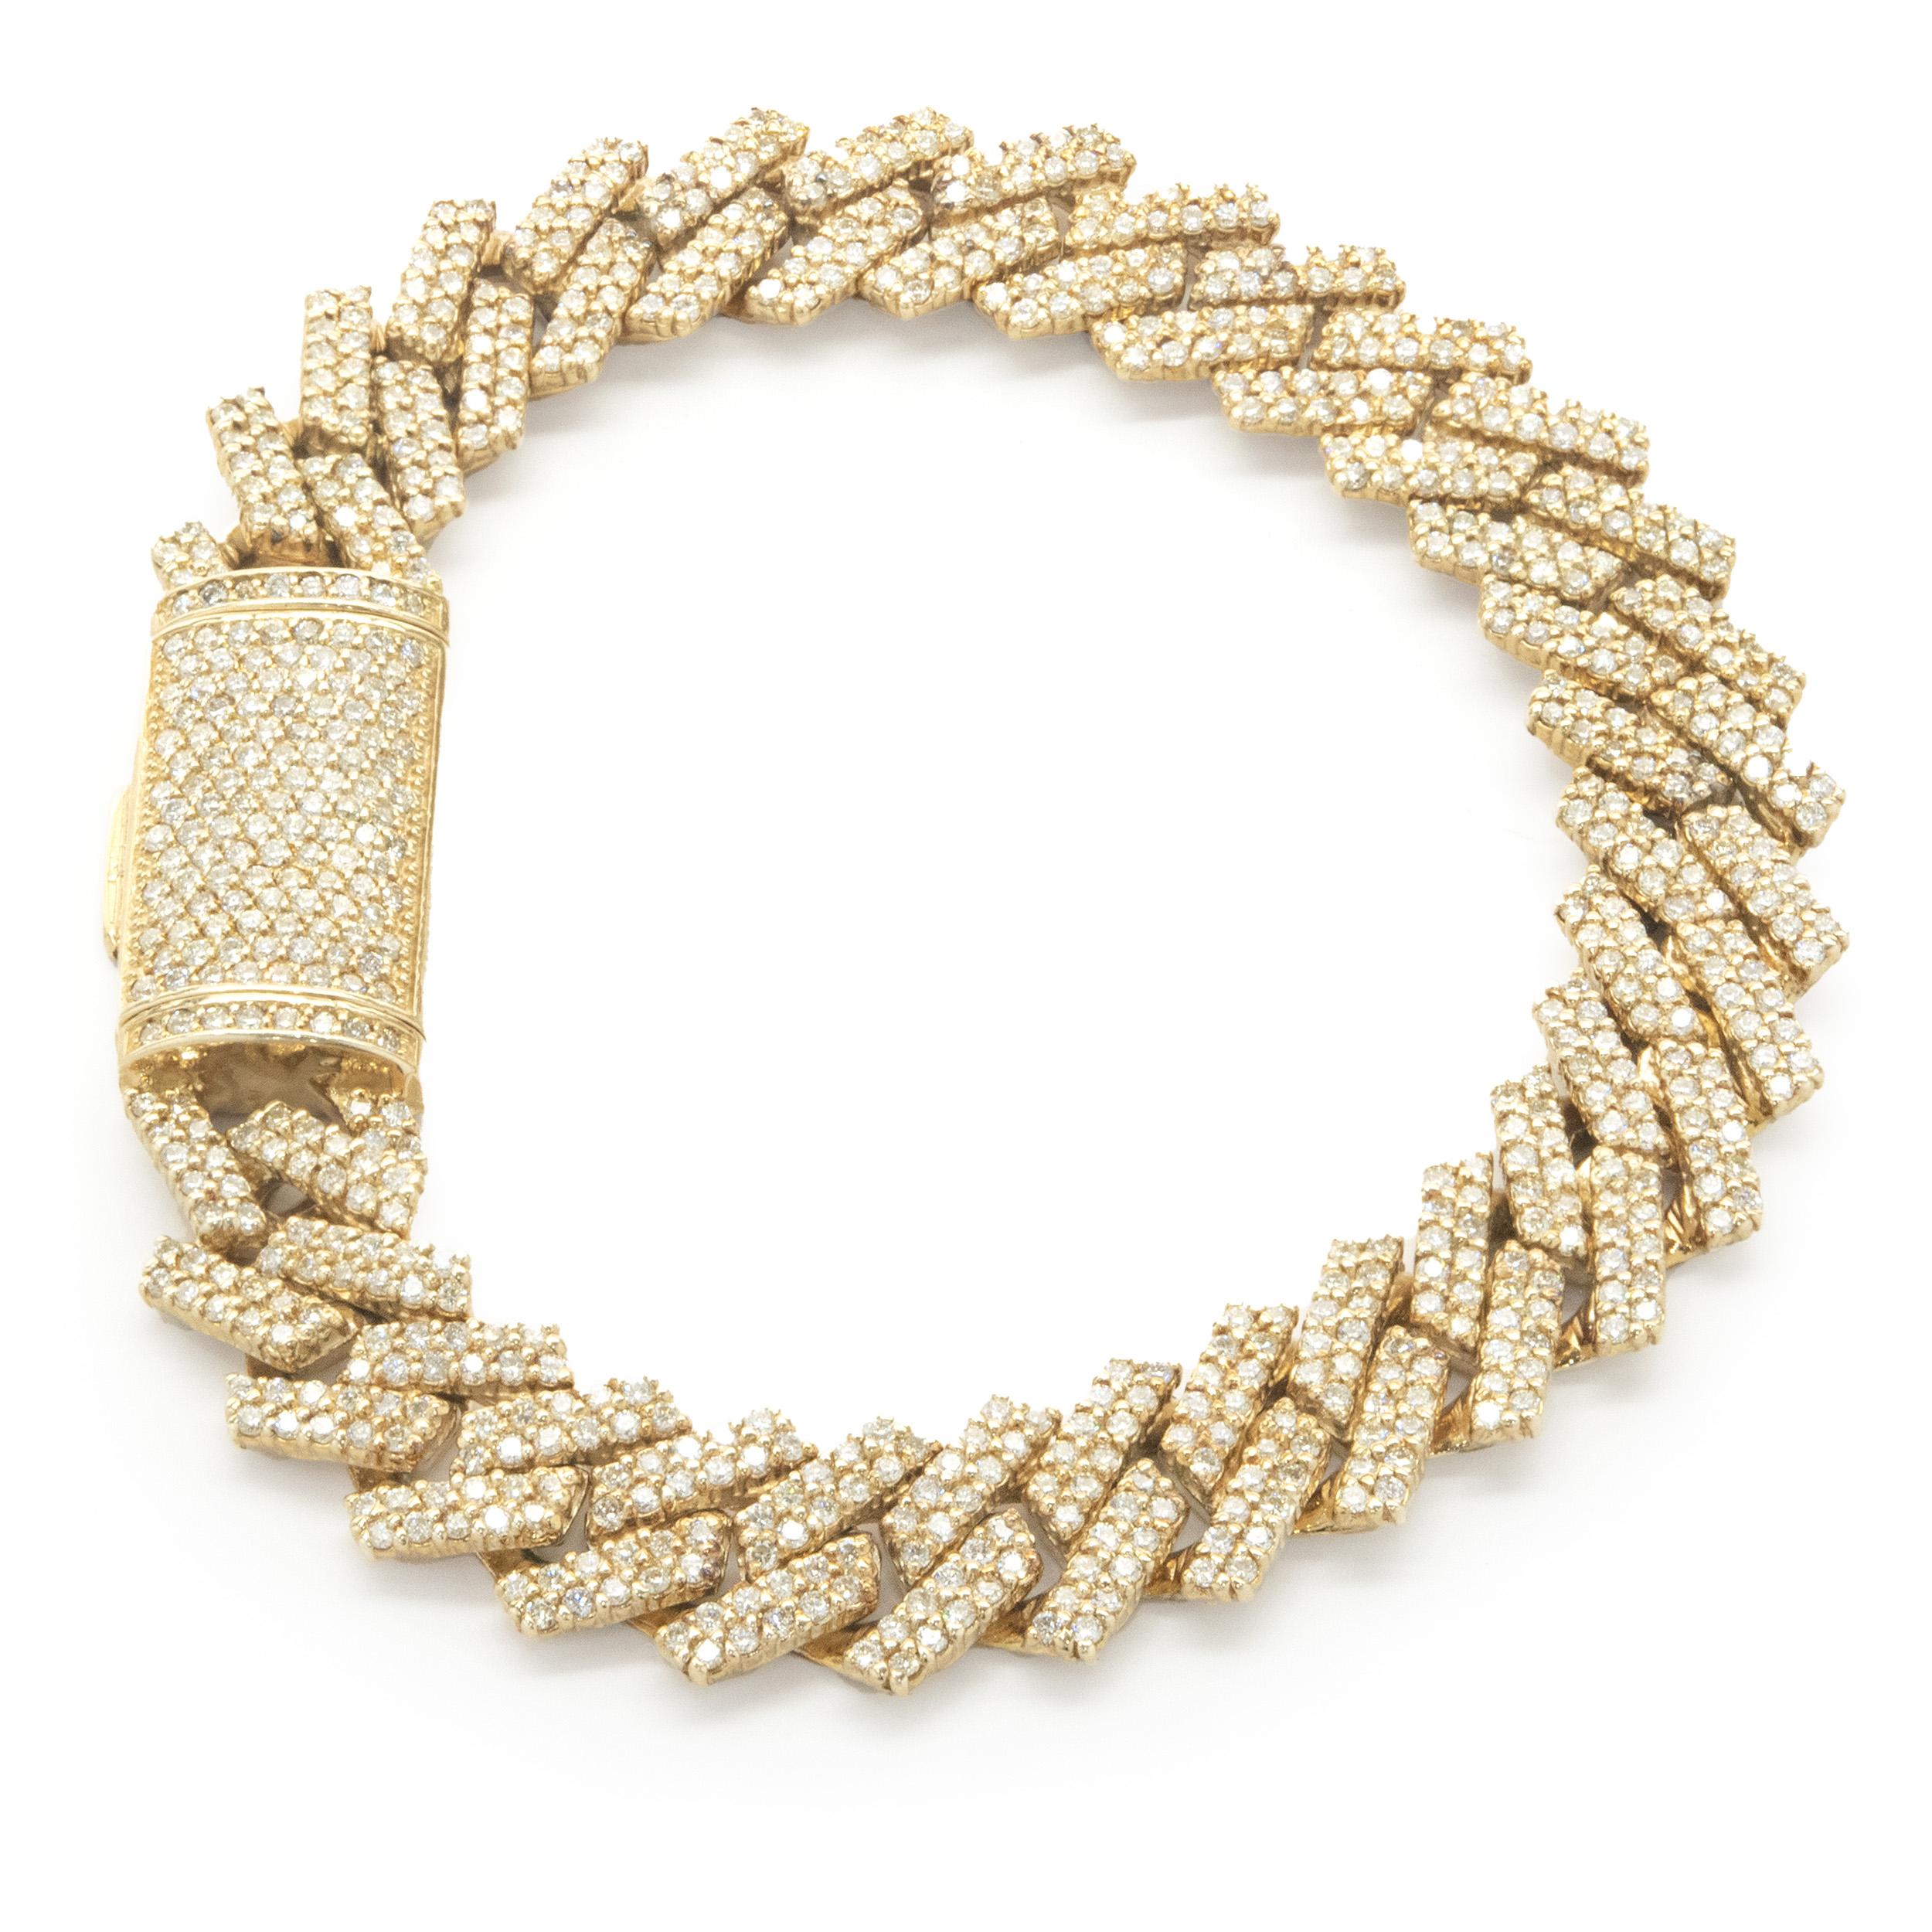 Material: 14K yellow gold
Diamonds: 467 round brilliant cut = 5.00cttw
Color: H
Clarity: SI1
Dimensions: bracelet measures 7.75-inches in length
Weight: 45.90 grams